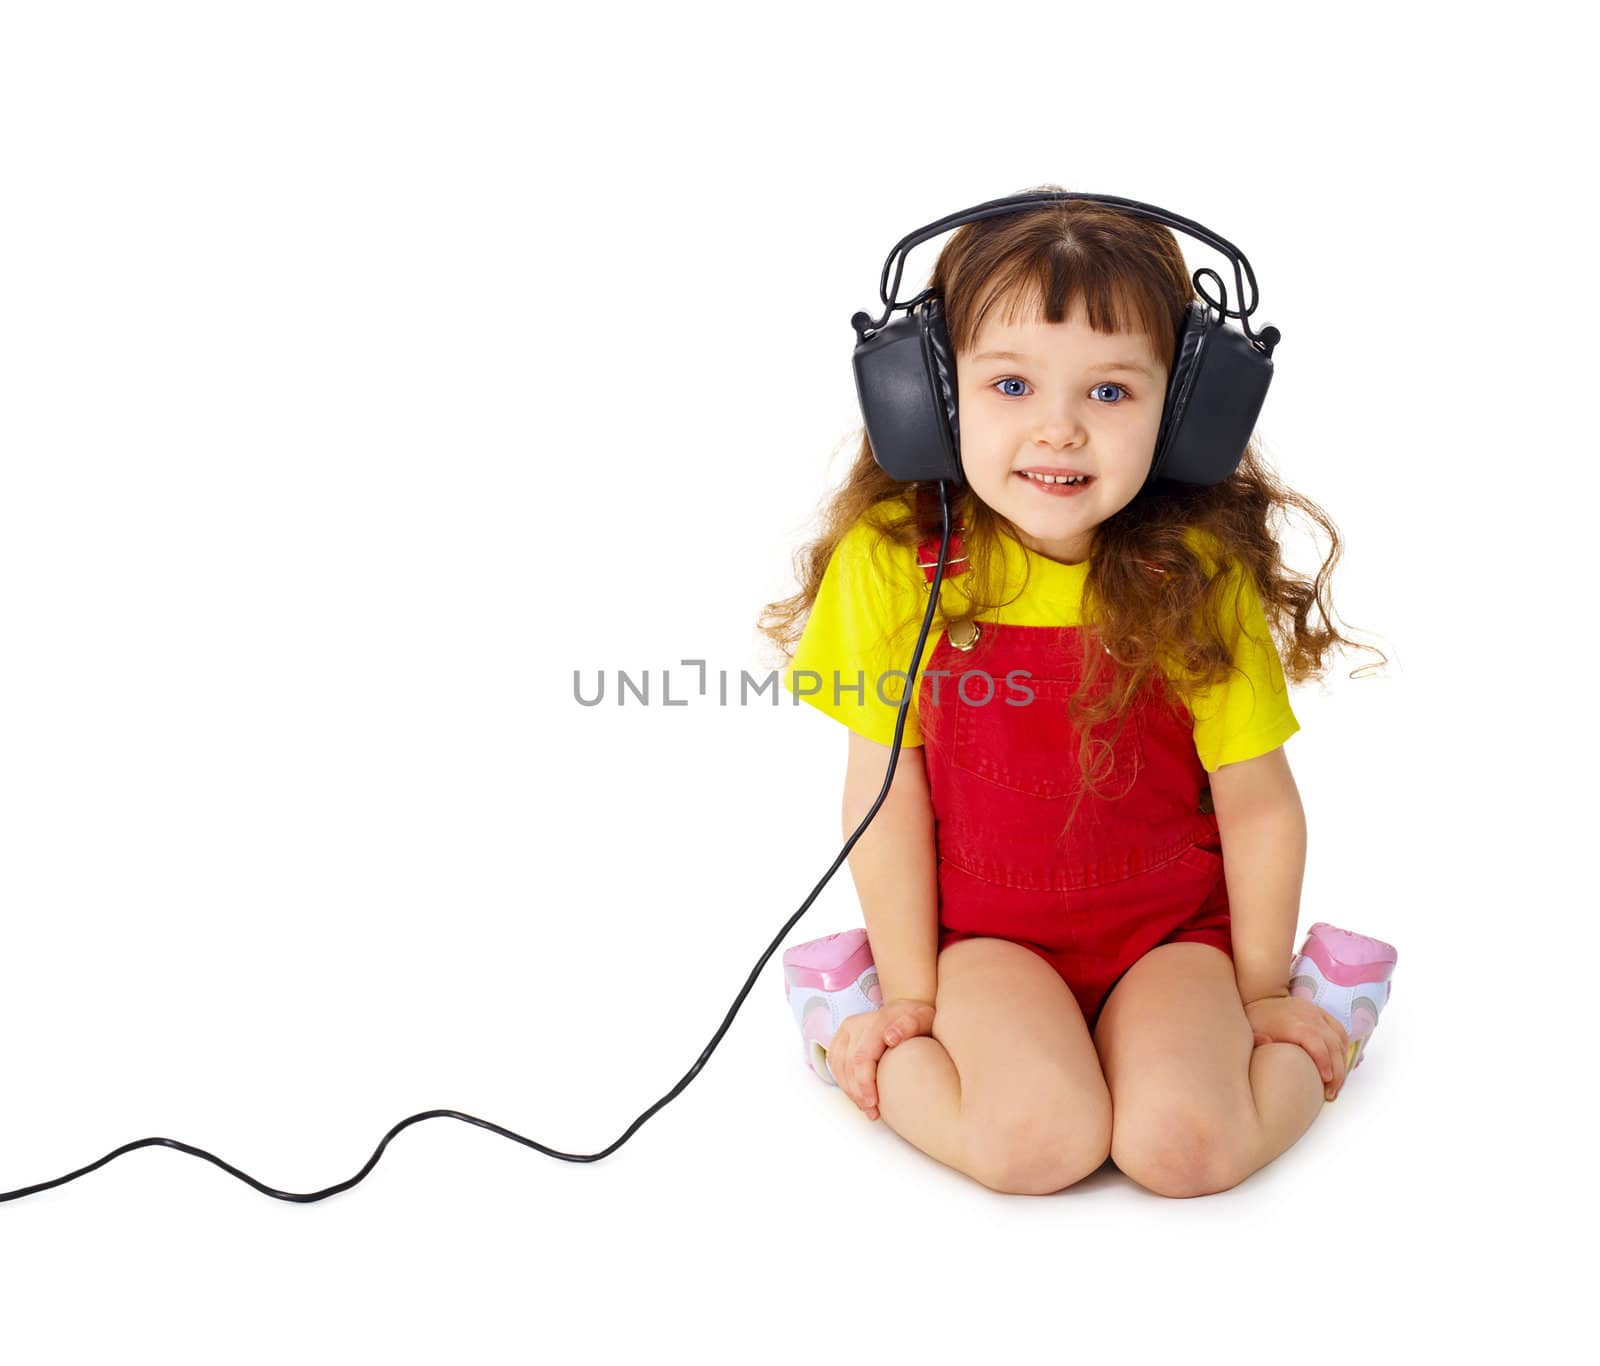 Child listens attentively to music on white by pzaxe